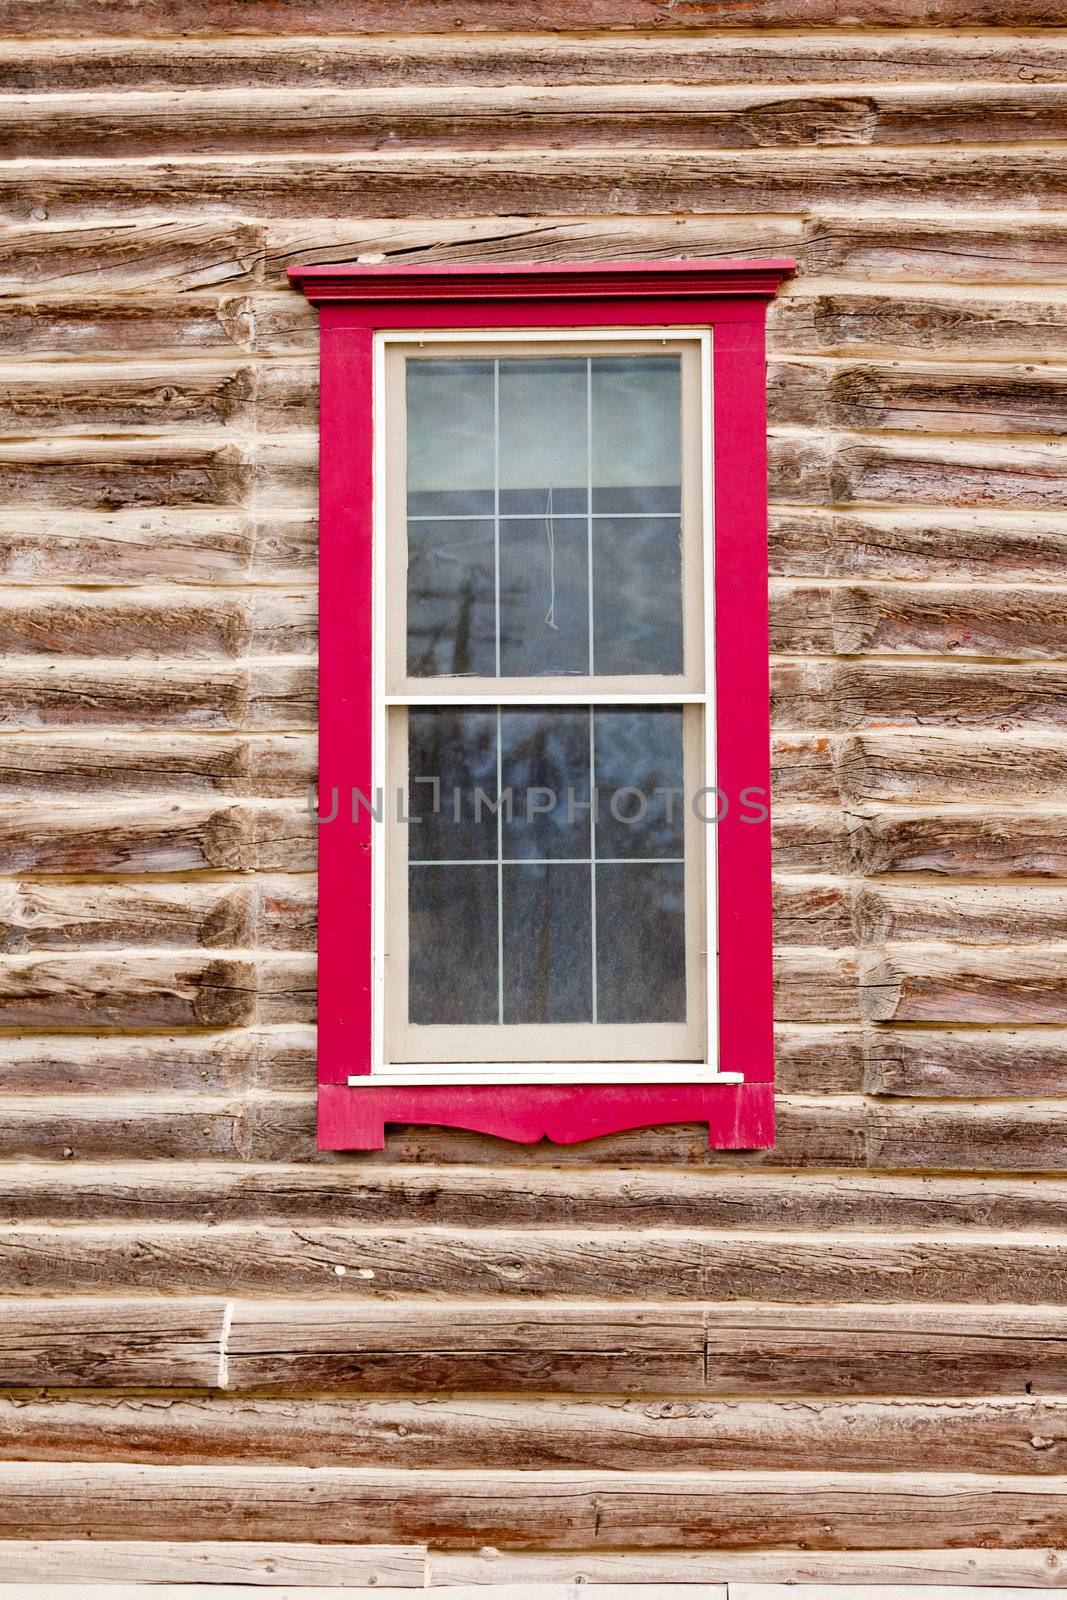 Architectural background of sash window with colourful red frame in exterior facade of a log building